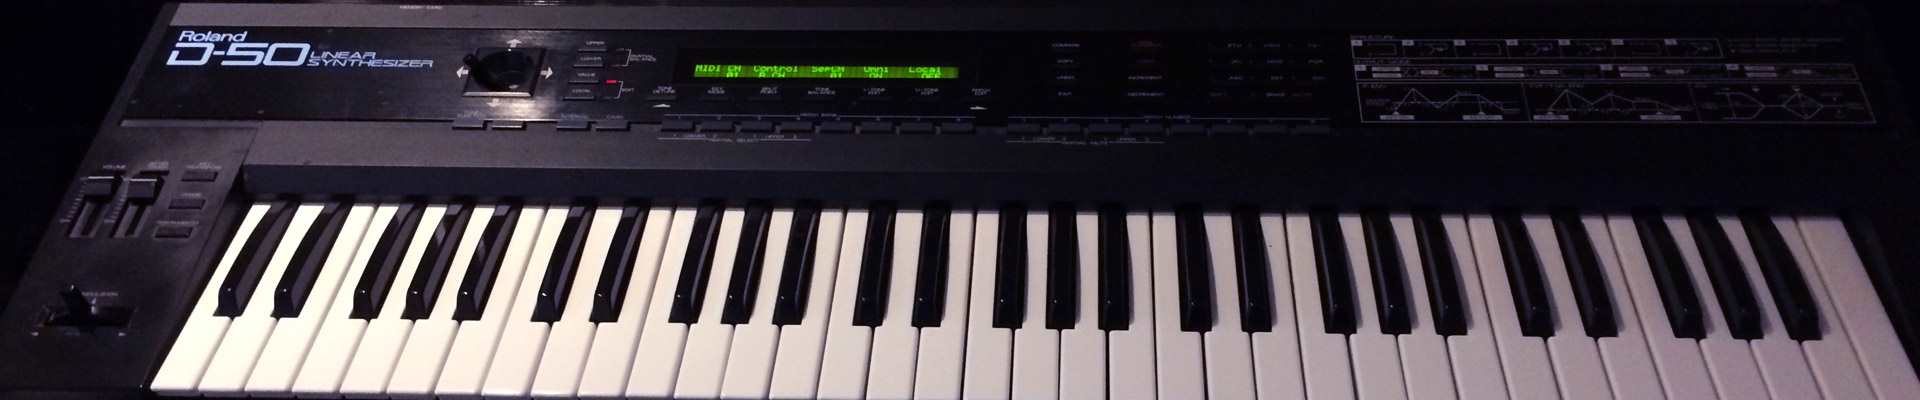 Roland D50 synthesizer - famous retro synth